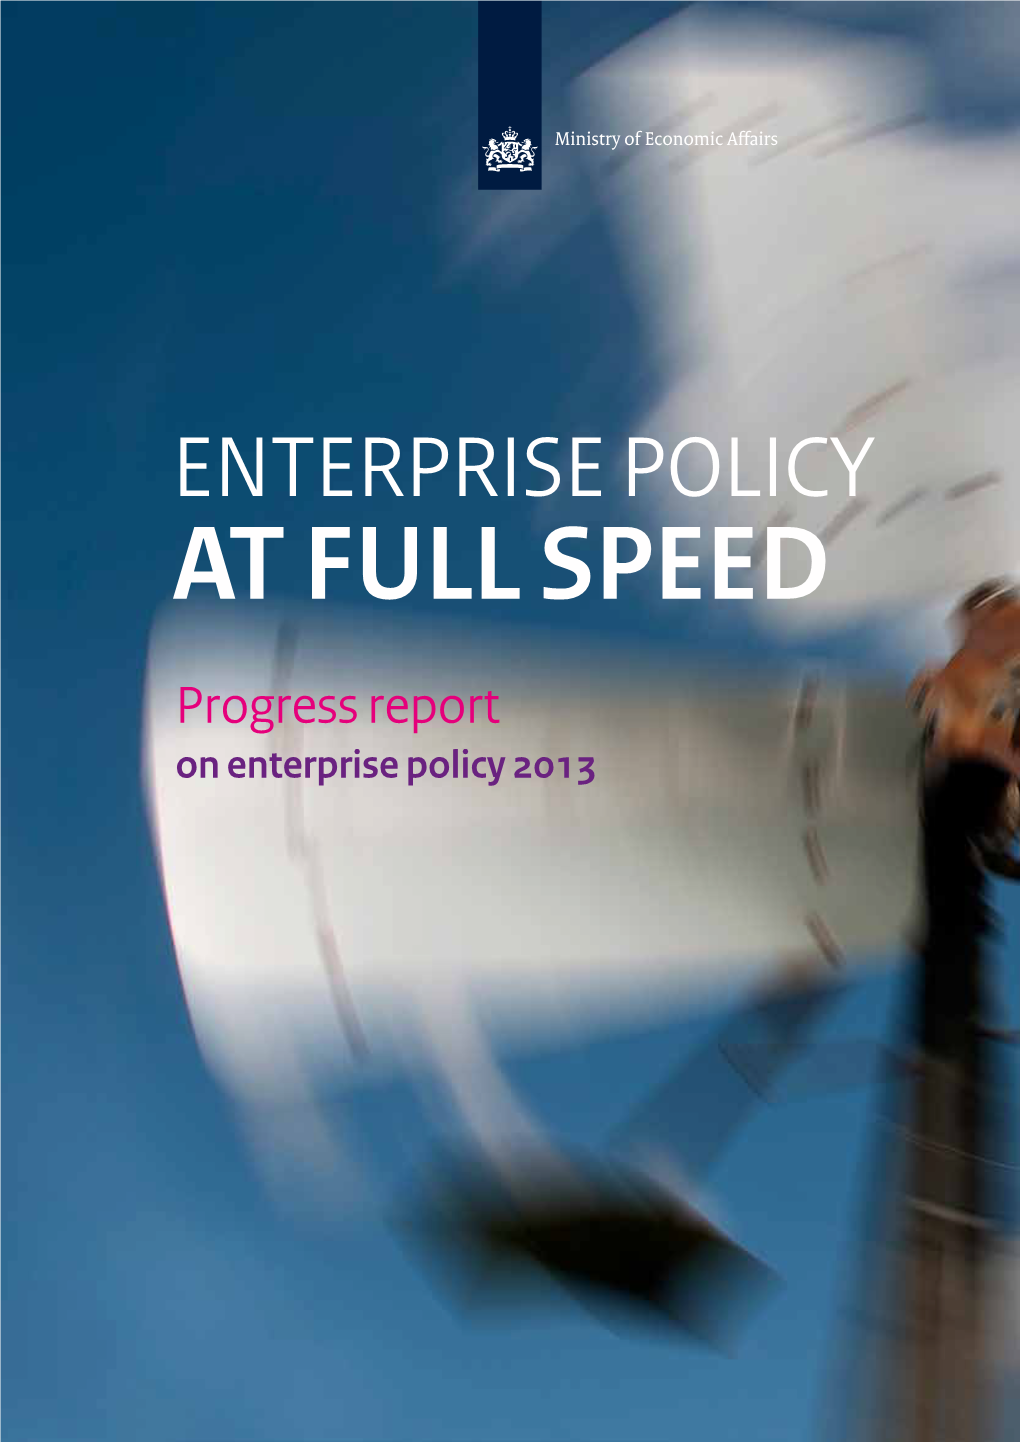 ENTERPRISE POLICY at FULL SPEED Progress Report on Enterprise Policy 2013